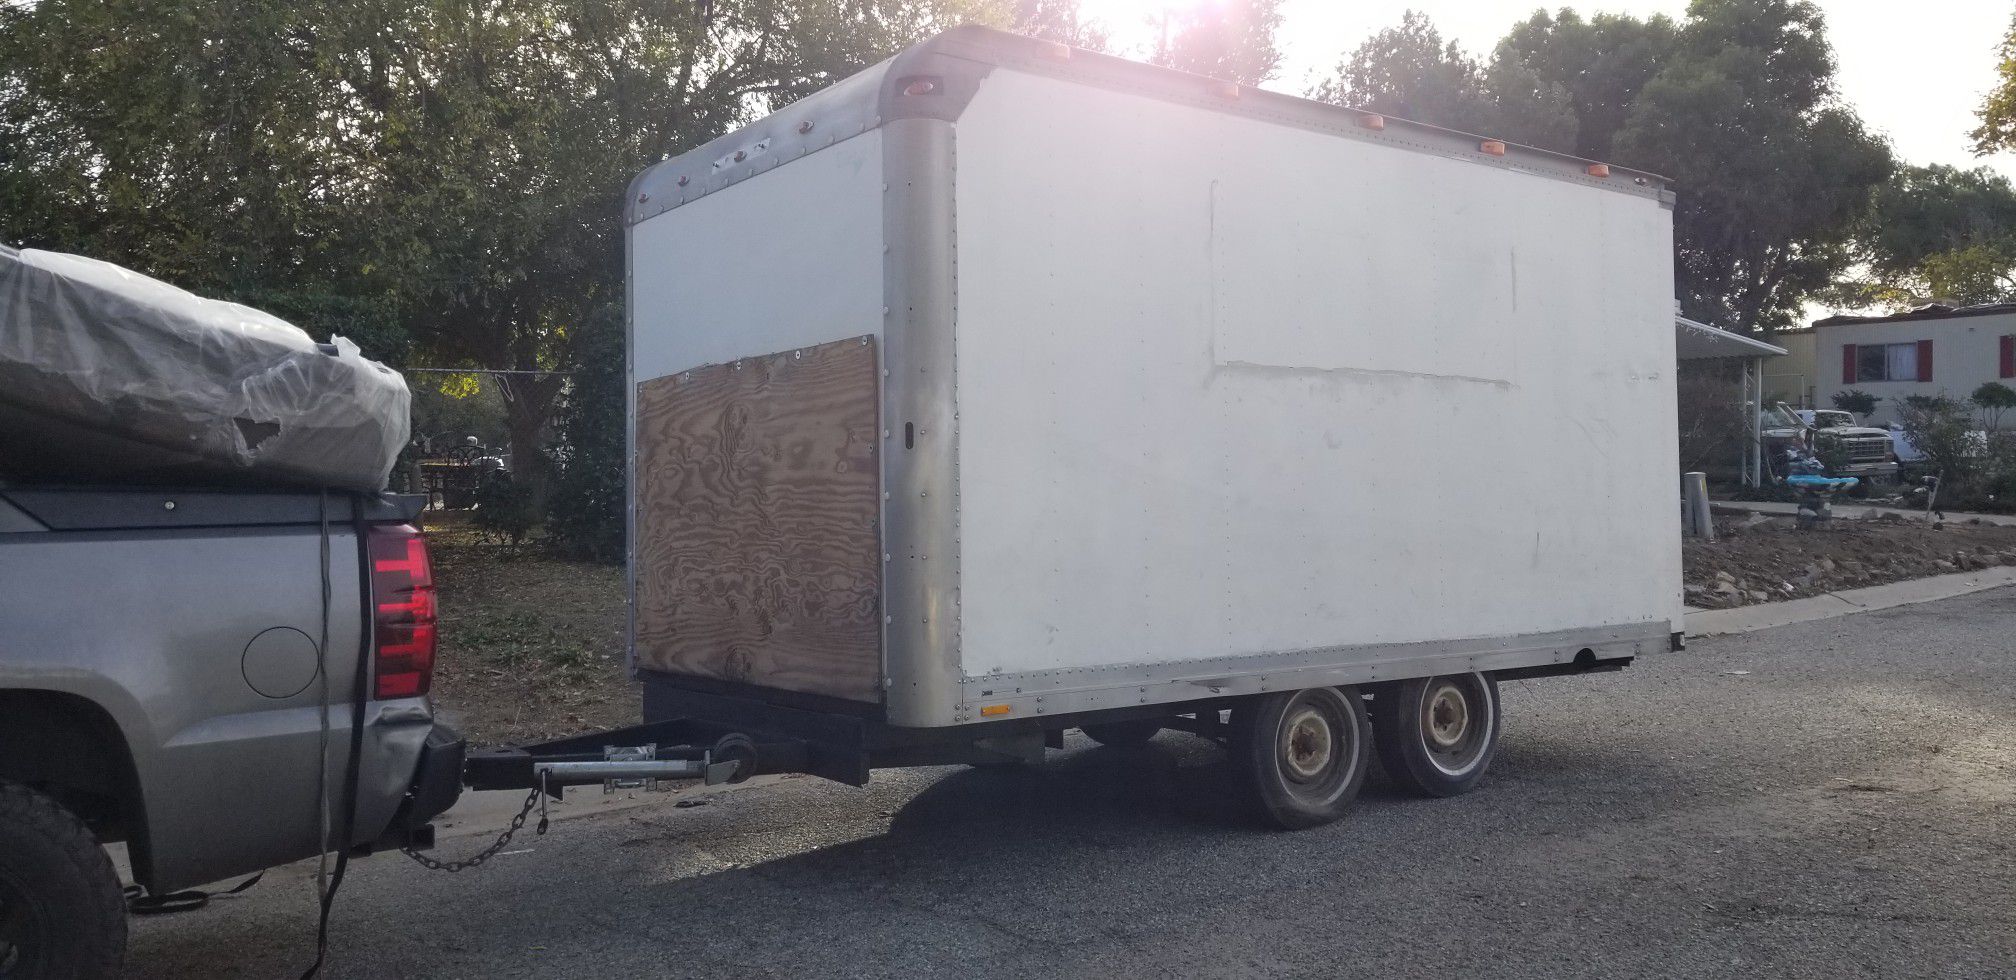 14' box trailer (this was a camping project. Just dont have time to finish now)